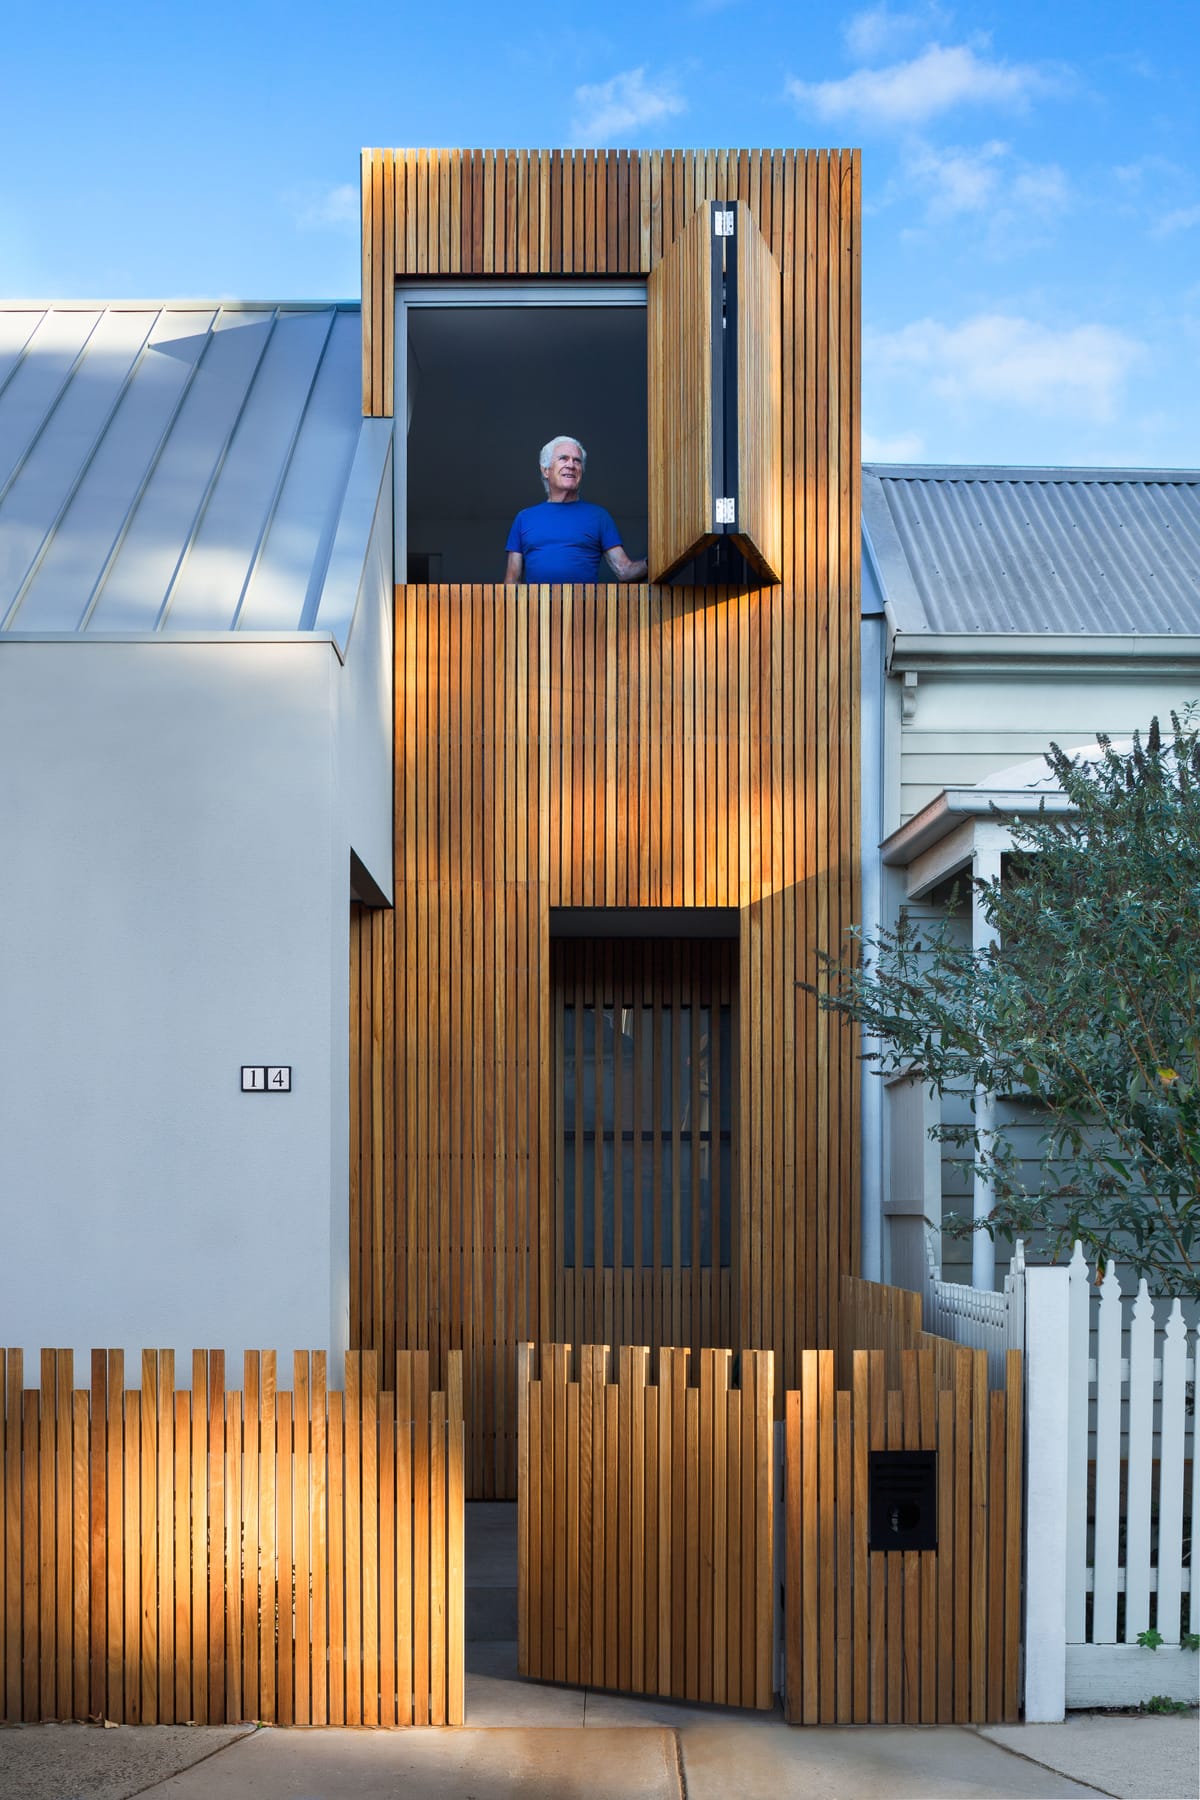 Cremorne House by Trethowan. Photography by Emily Bartlett. Double story timber clad residential home with window on top floo